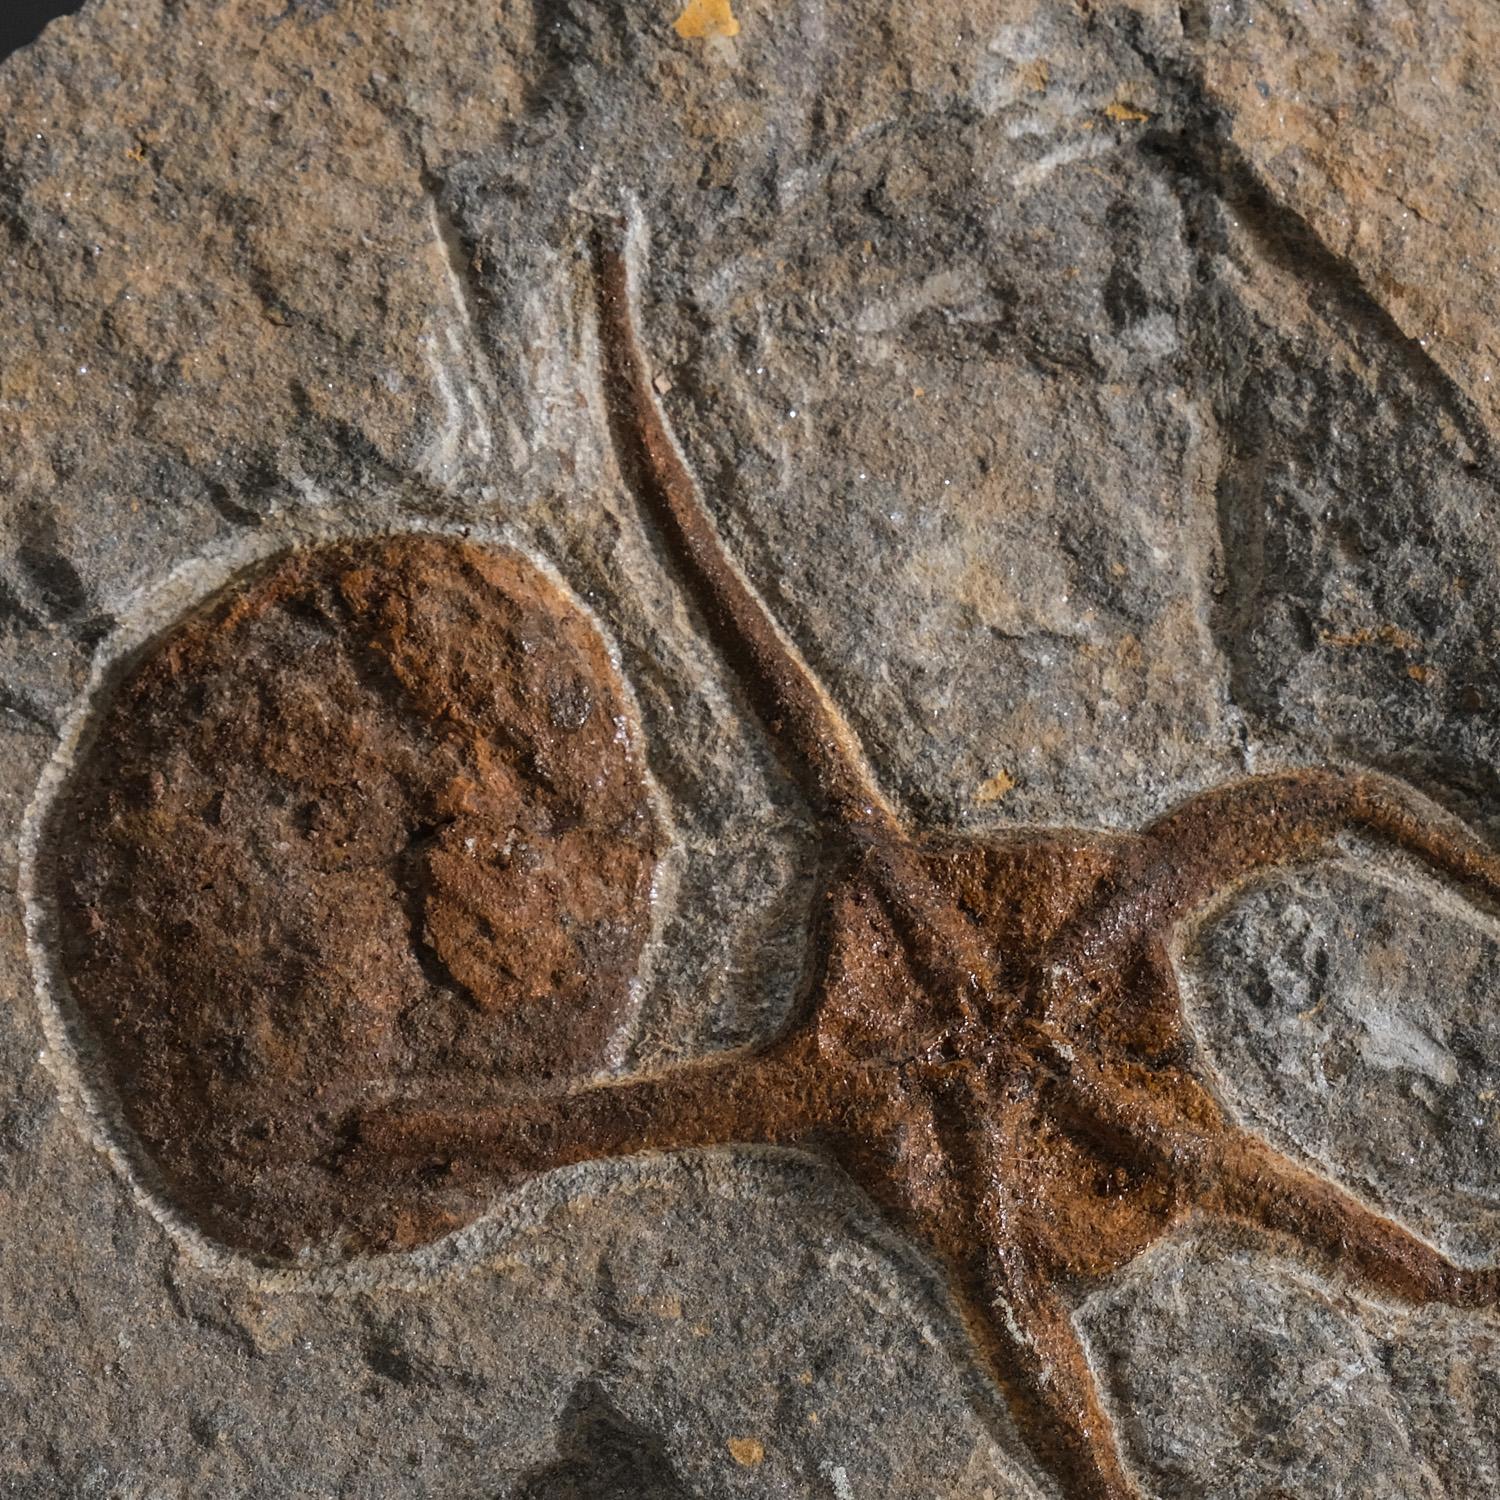 Brittle stars or ophiuroids are echinoderms in the class Ophiuroidea closely related to starfish. They crawl across the sea floor using their flexible arms for locomotion. The most famous Jurassic deposit in the world, is found in the Solnhofen, and